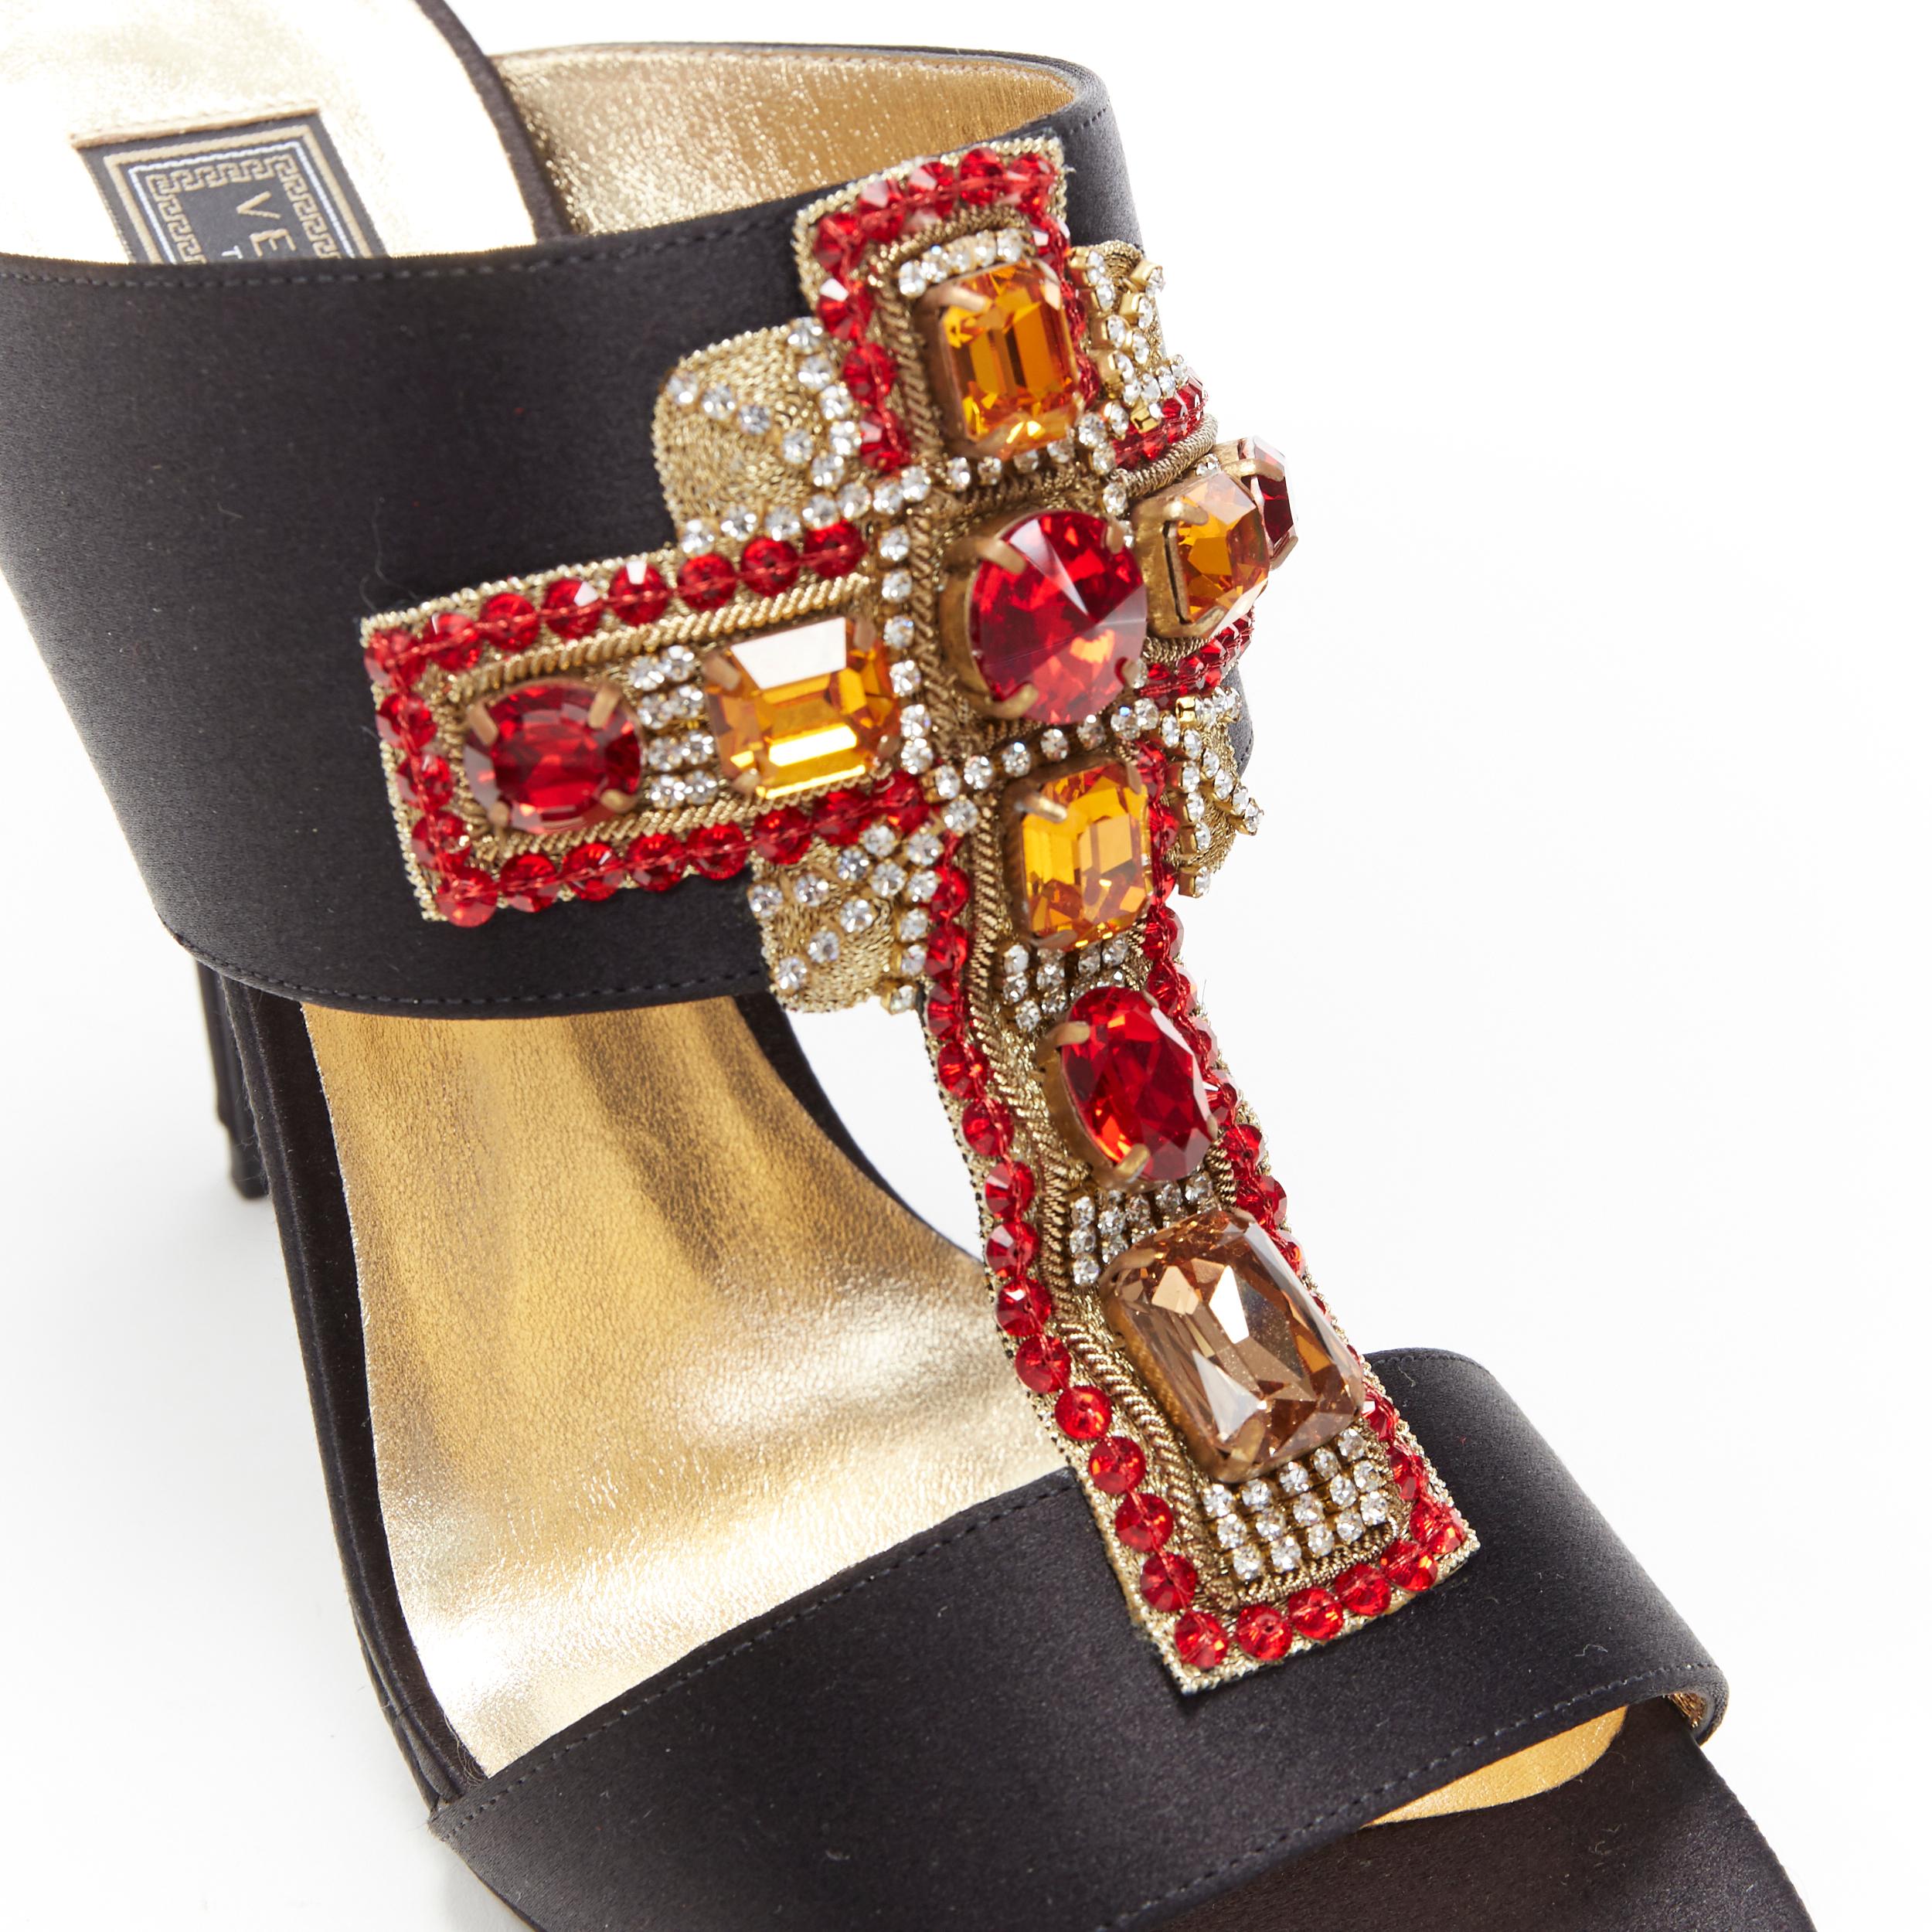 new VERSACE Tribute SS18 byzantine red jewel crystal cross black satin mule EU38
Brand: Versace
Designer: Donatella Versace
Model Name / Style: Byzantine mule
Material: Silk
Color: Black
Pattern: Solid; cross
Lining material: Leather
Extra Detail: